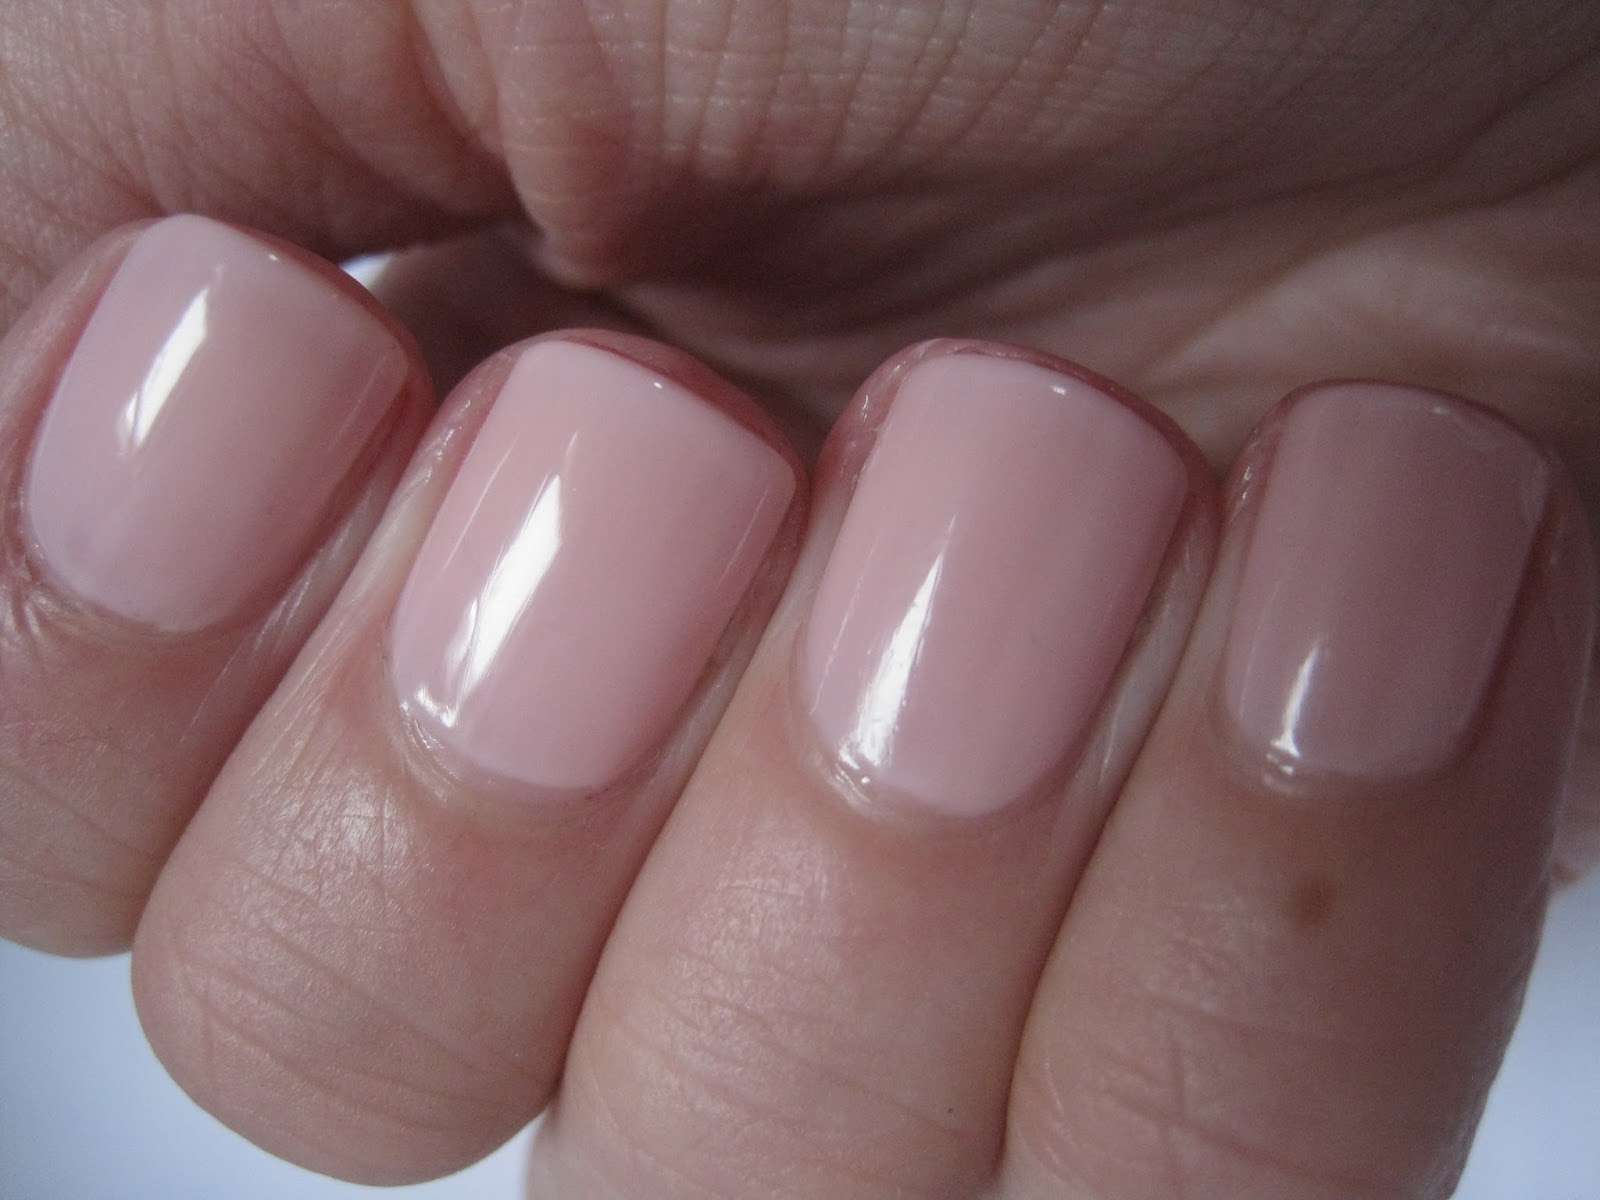 China Glaze Nail Lacquer in Innocence - wide 4